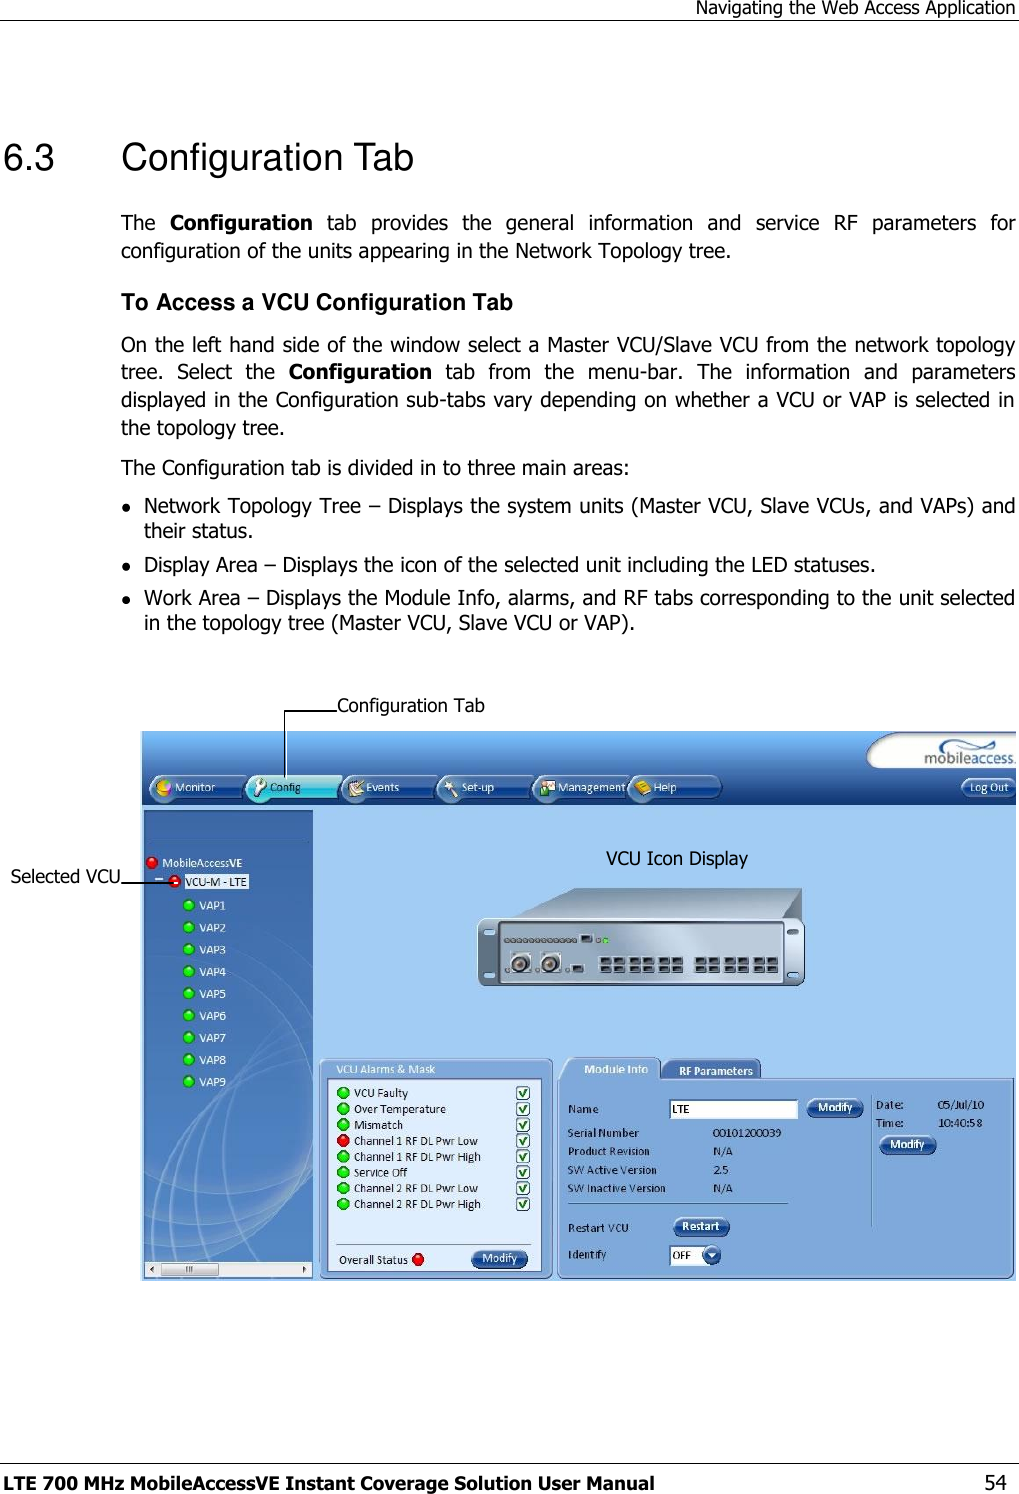 Navigating the Web Access Application LTE 700 MHz MobileAccessVE Instant Coverage Solution User Manual  54  6.3  Configuration Tab The  Configuration  tab  provides  the  general  information  and  service  RF  parameters  for configuration of the units appearing in the Network Topology tree.  To Access a VCU Configuration Tab On the left hand side of the window select a Master VCU/Slave VCU from the network topology tree.  Select  the  Configuration  tab  from  the  menu-bar.  The  information  and  parameters displayed in the Configuration sub-tabs vary depending on whether a VCU or VAP is selected in the topology tree. The Configuration tab is divided in to three main areas:  Network Topology Tree – Displays the system units (Master VCU, Slave VCUs, and VAPs) and their status.  Display Area – Displays the icon of the selected unit including the LED statuses.  Work Area – Displays the Module Info, alarms, and RF tabs corresponding to the unit selected in the topology tree (Master VCU, Slave VCU or VAP).     Selected VCU VCU Icon Display Configuration Tab  